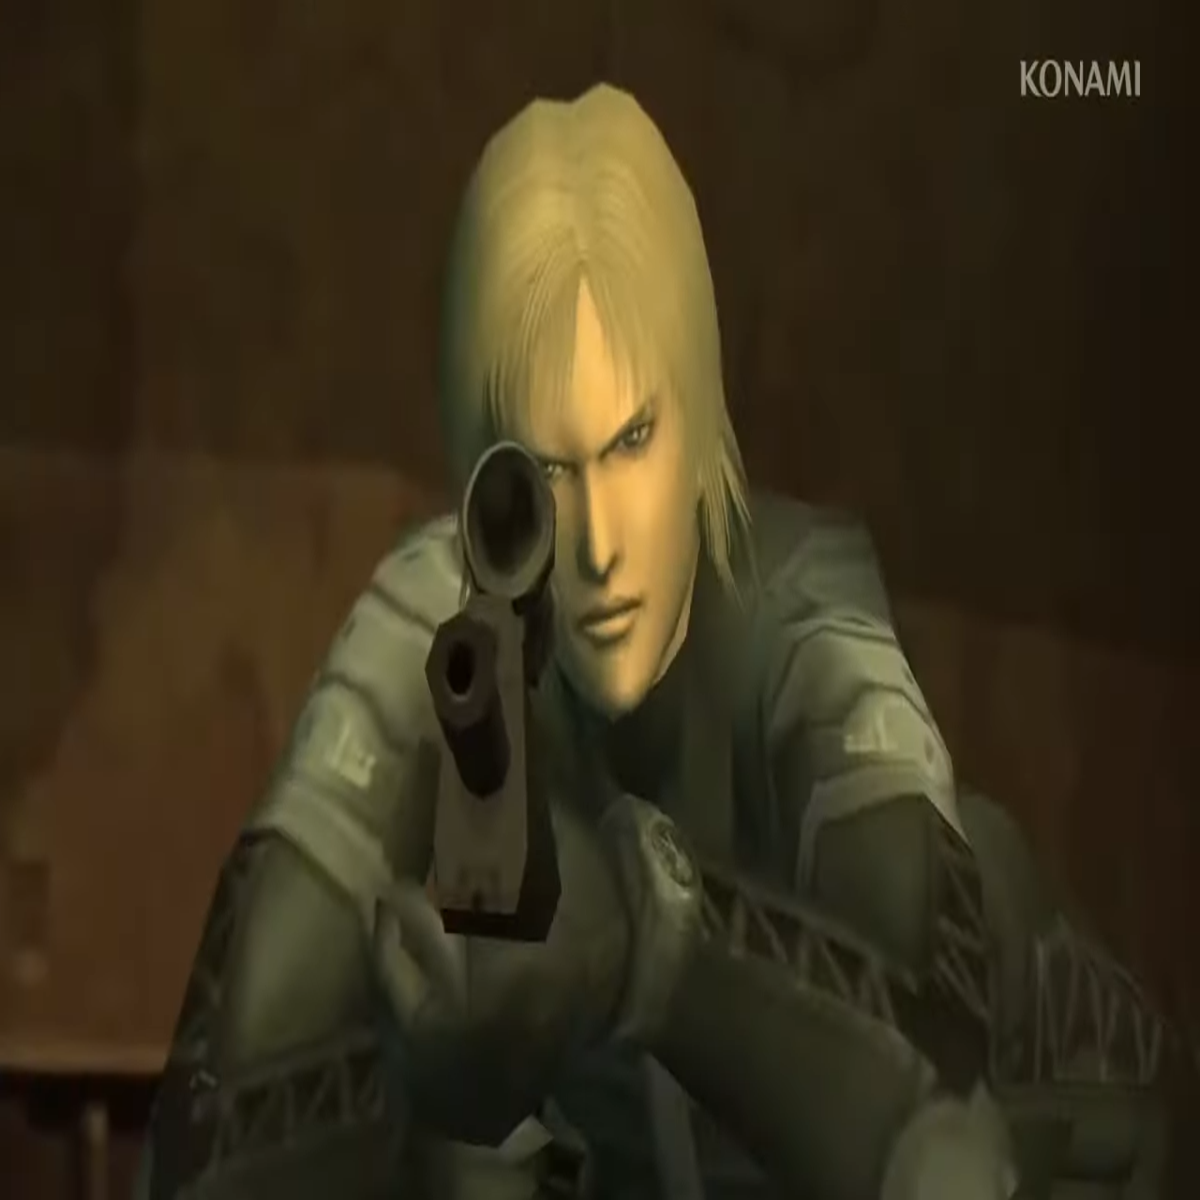 Metal Gear Solid: Master Collection Vol.1 Metal Gear Solid 2: Sons